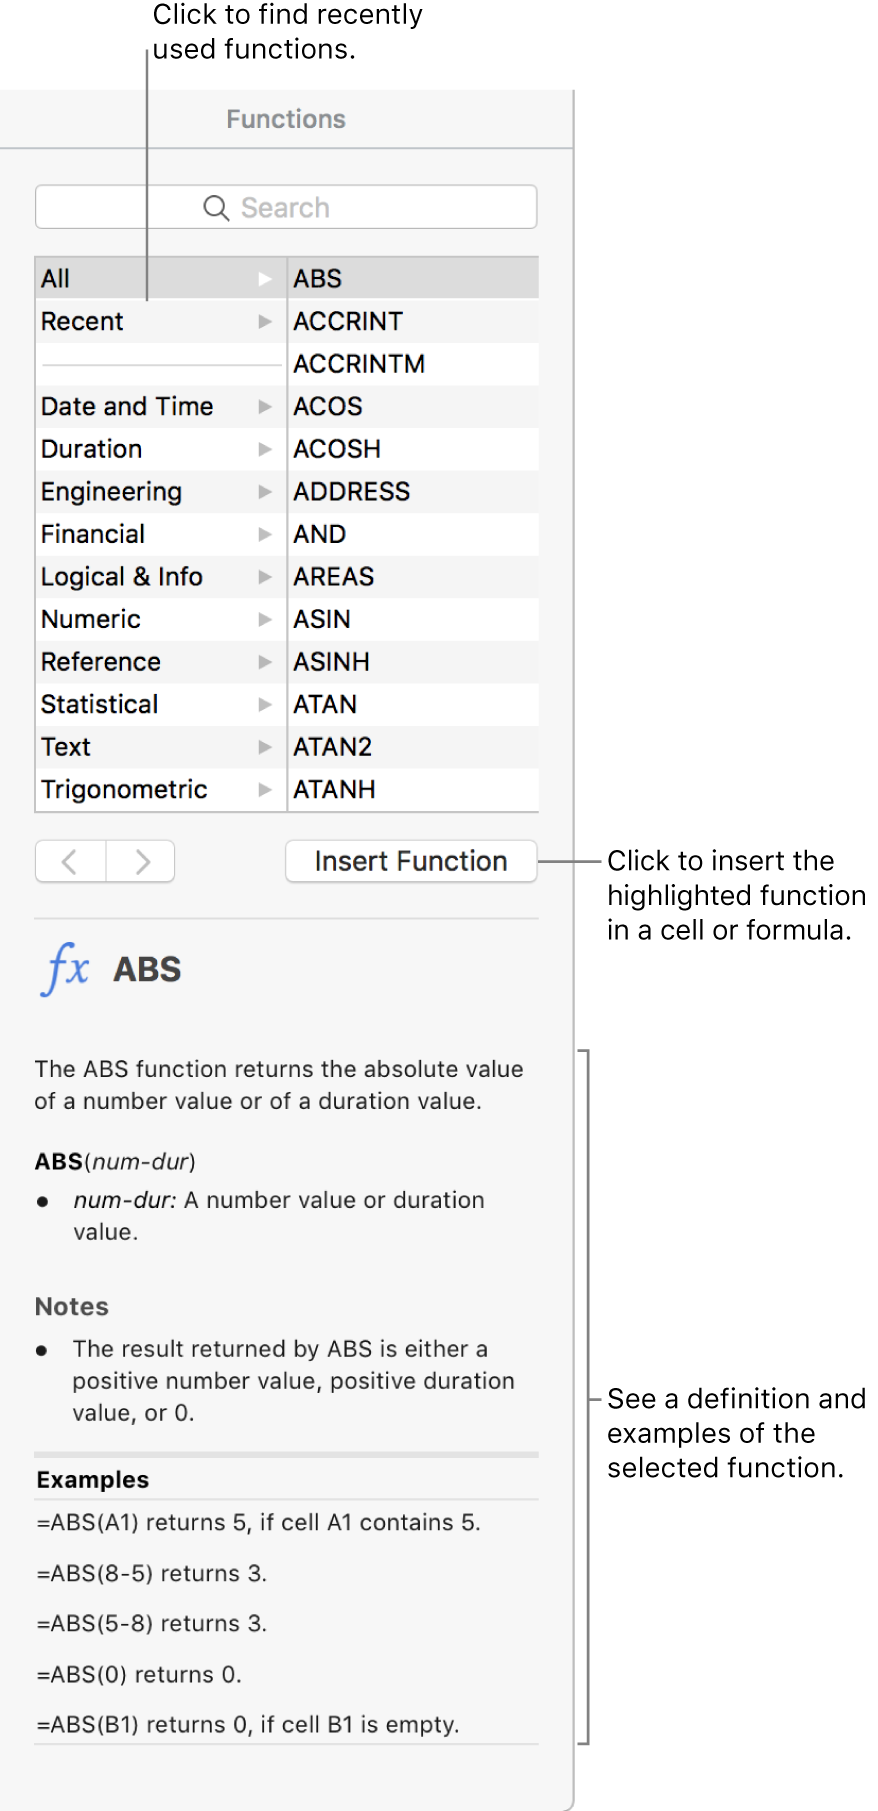 The Function Browser with callouts to recently used functions, the Insert Function button, and the function definition.